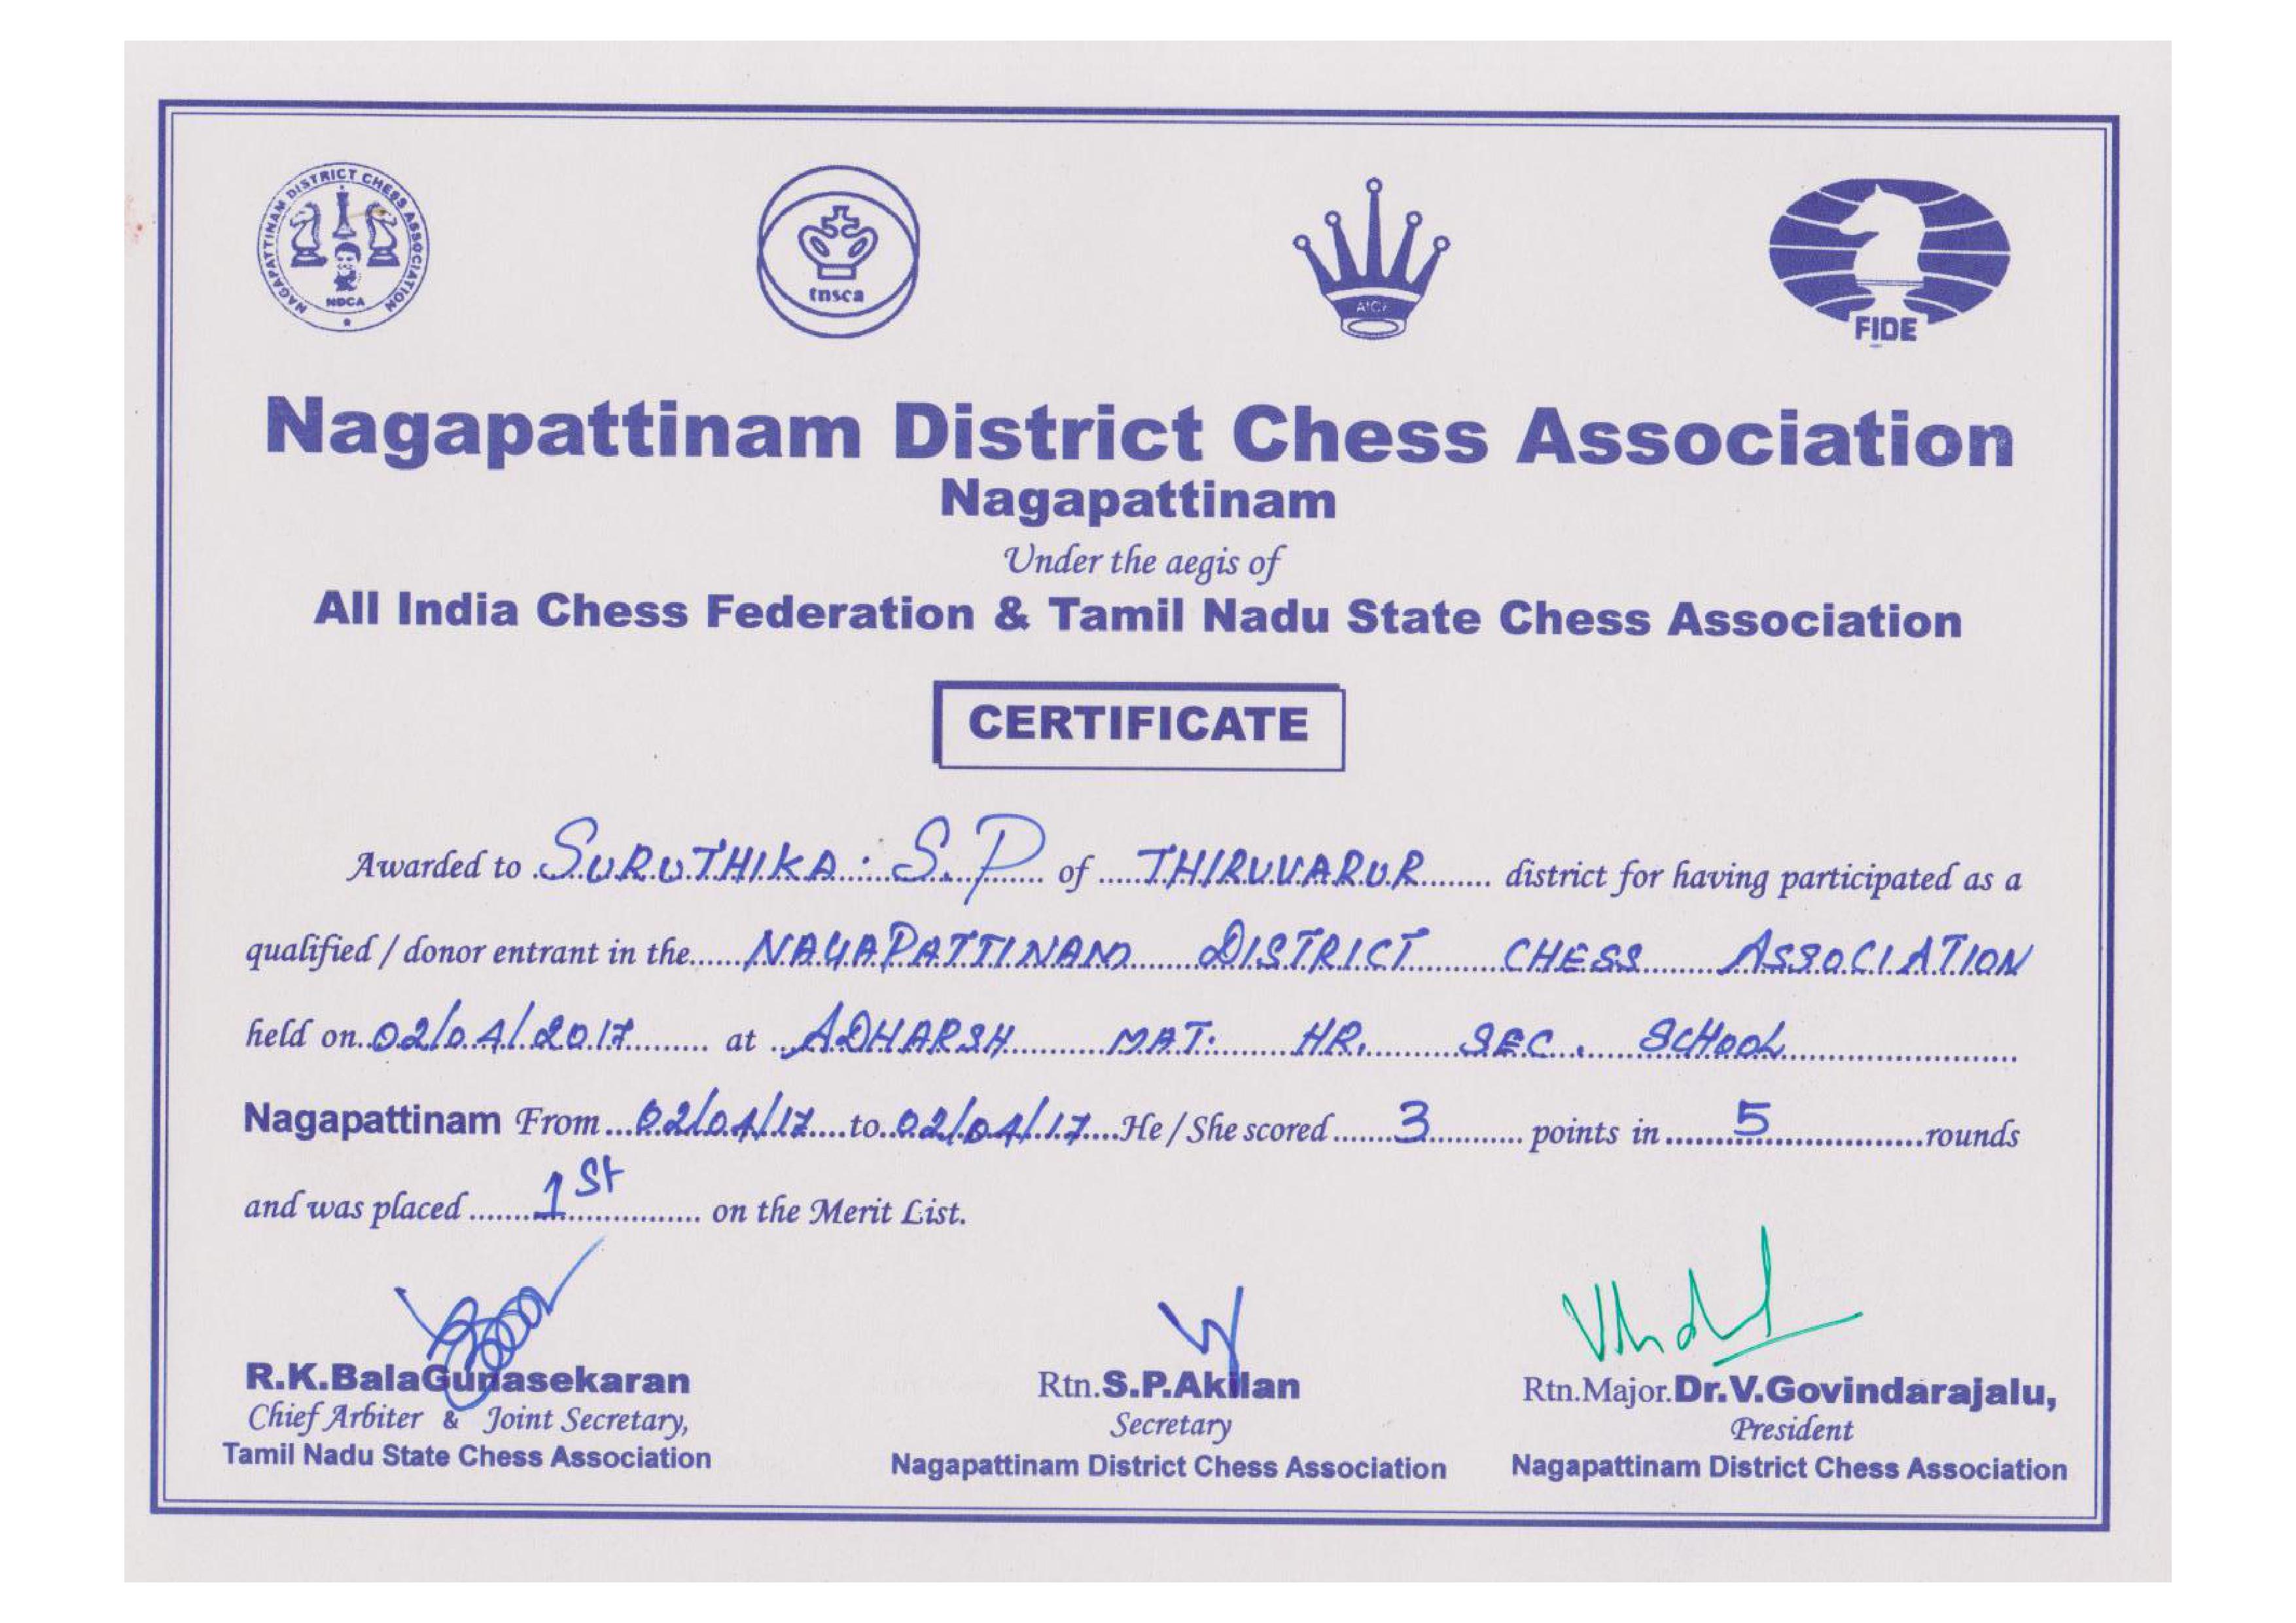 All India Chess Federation & Tamil Nadu State Chess Association